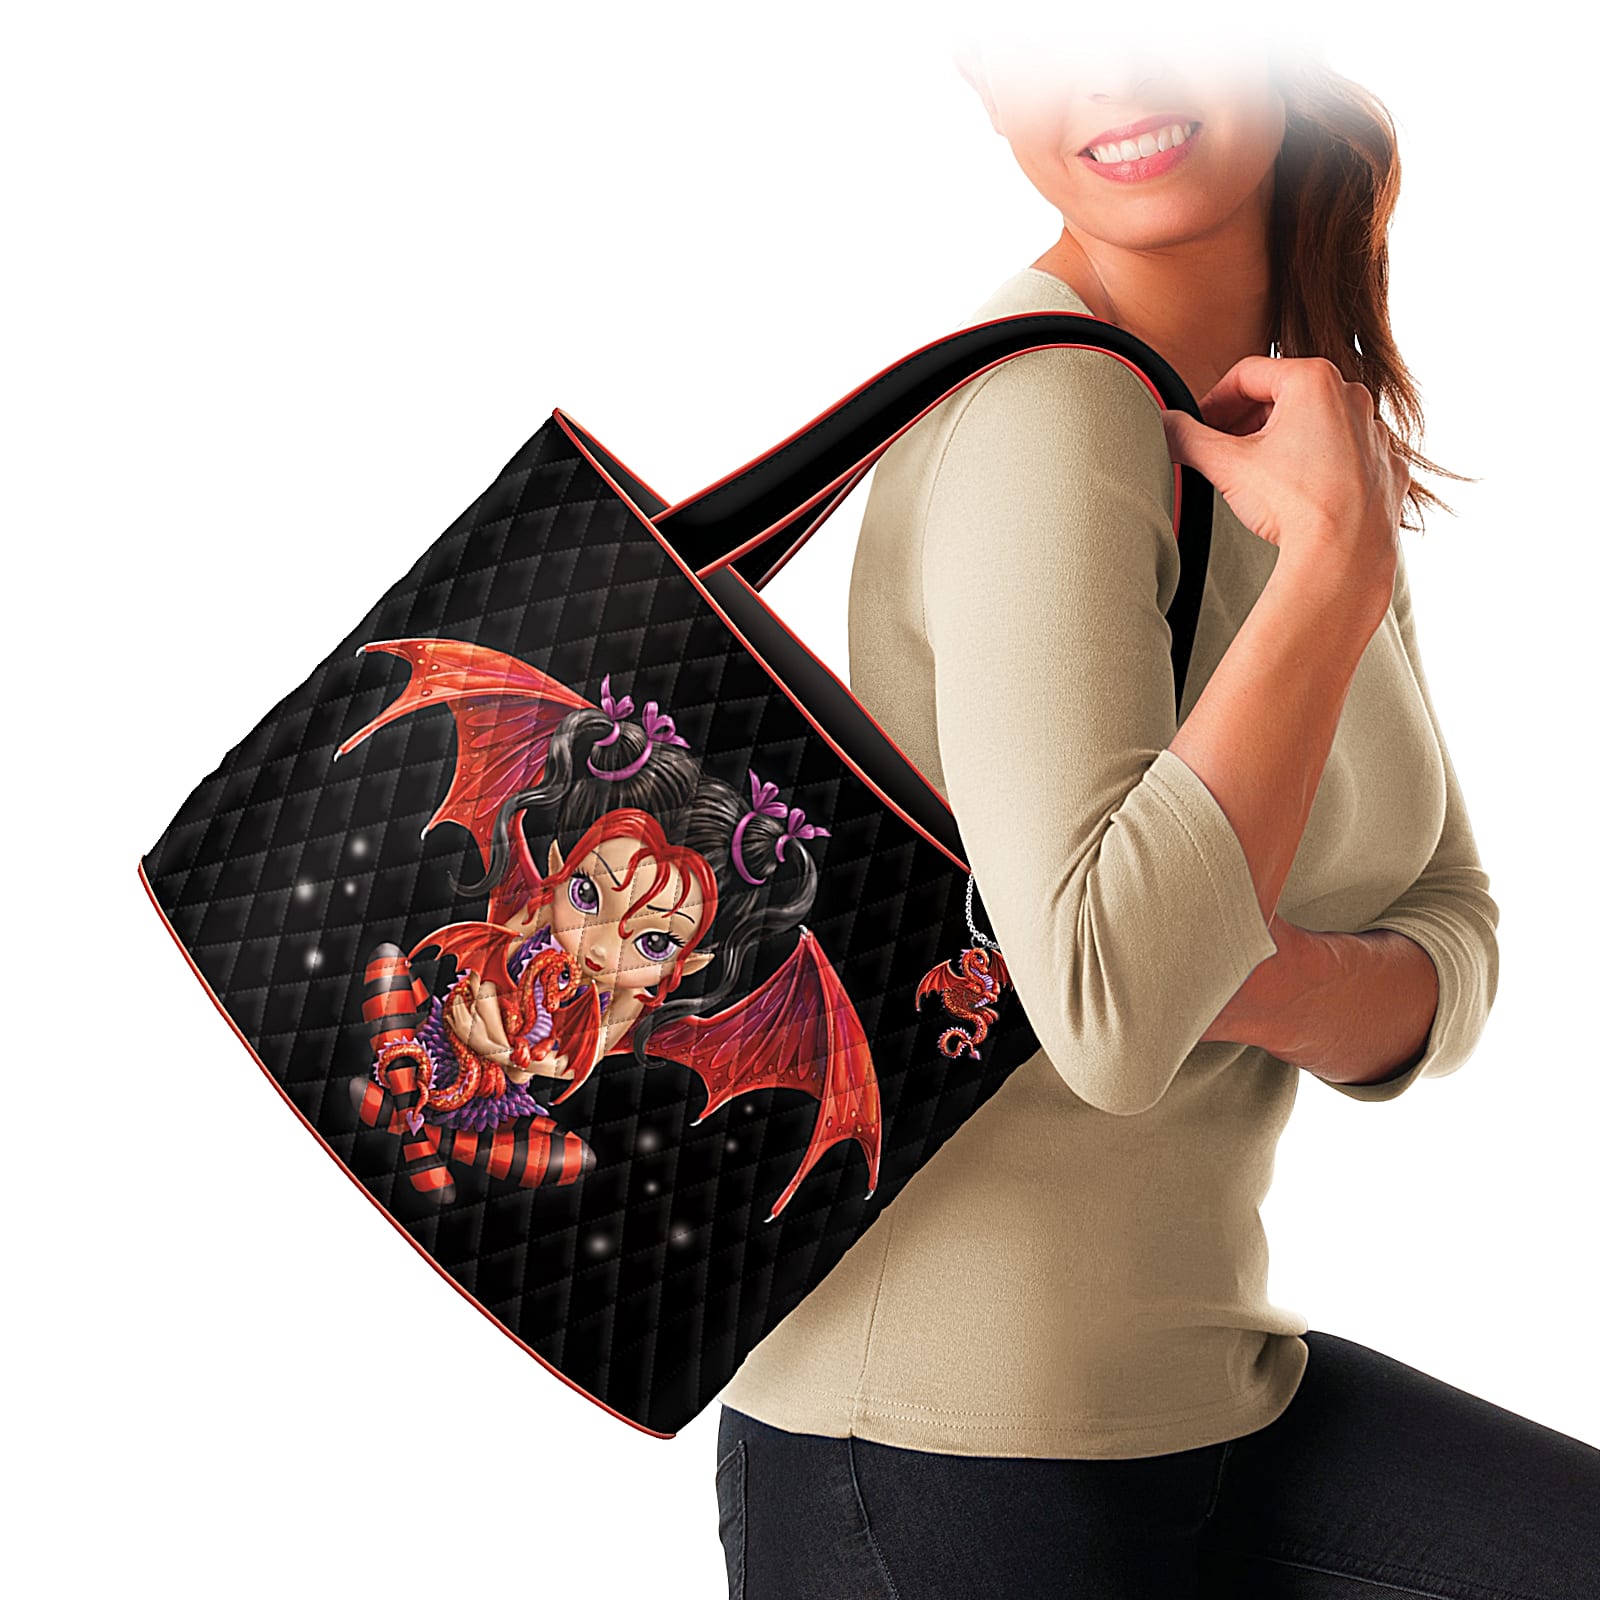 Ruby tote stock image